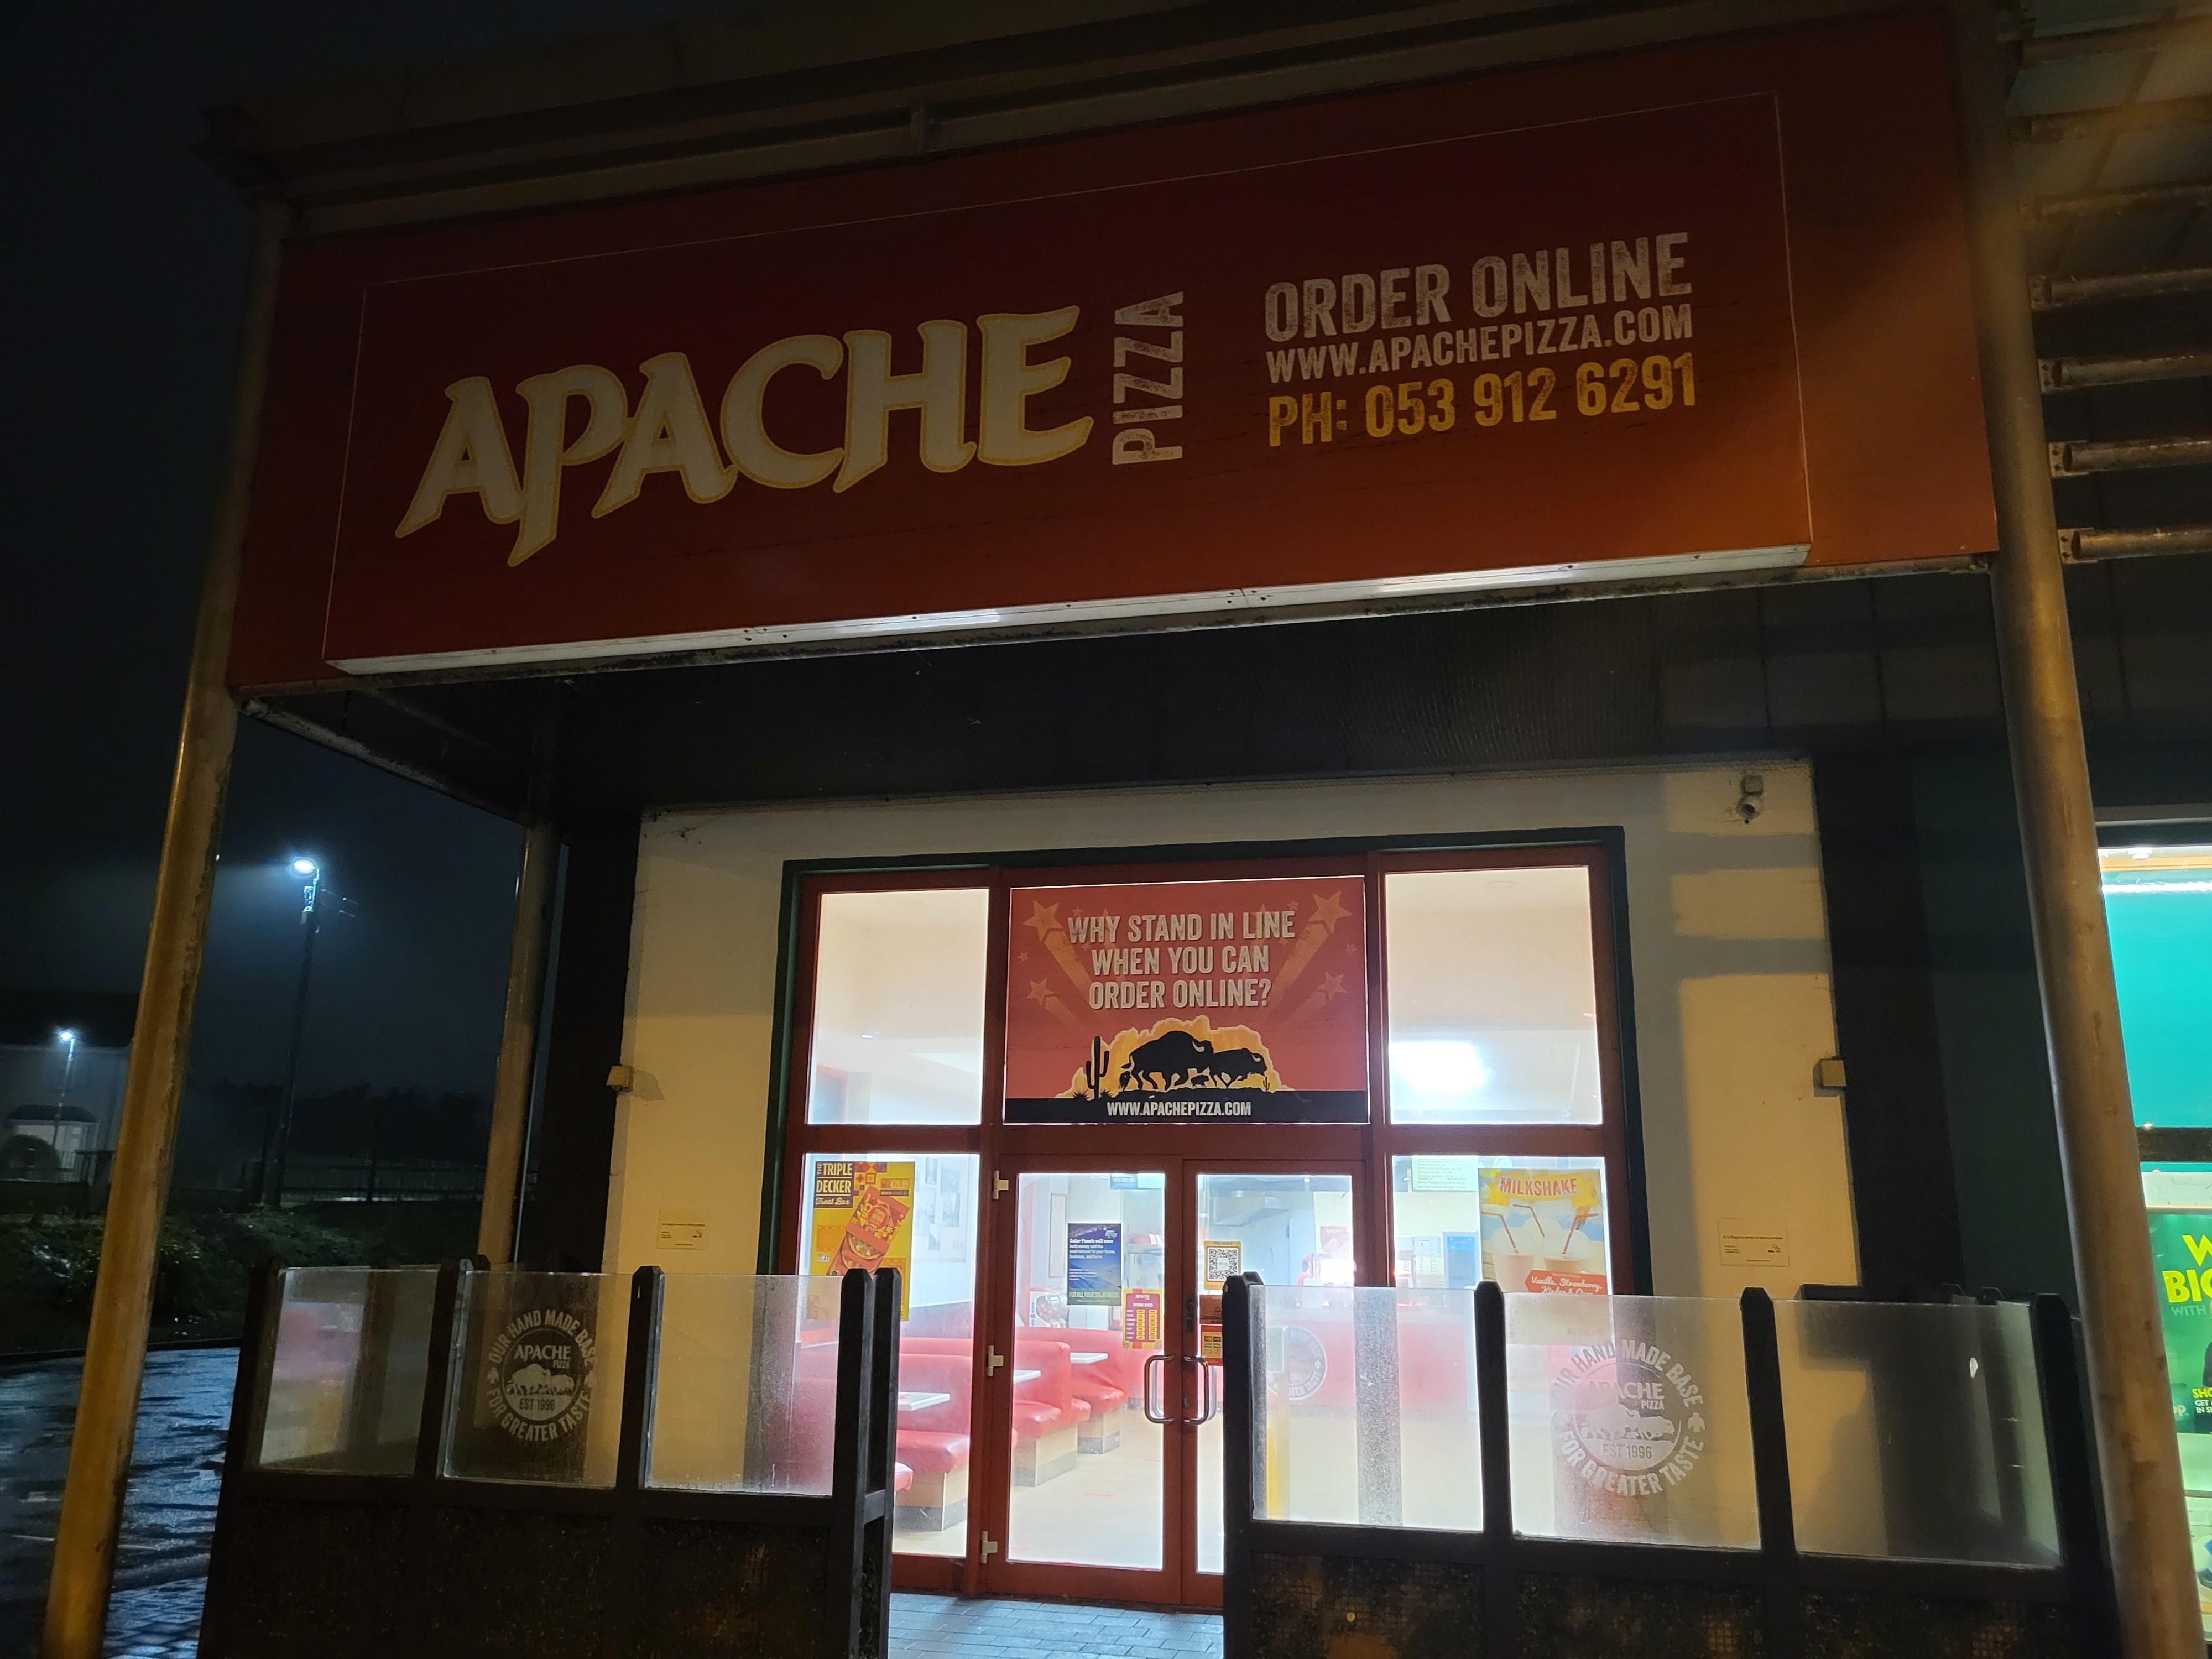 Wexford store front Apache Pizza Wexford Wexford (053) 912 6291